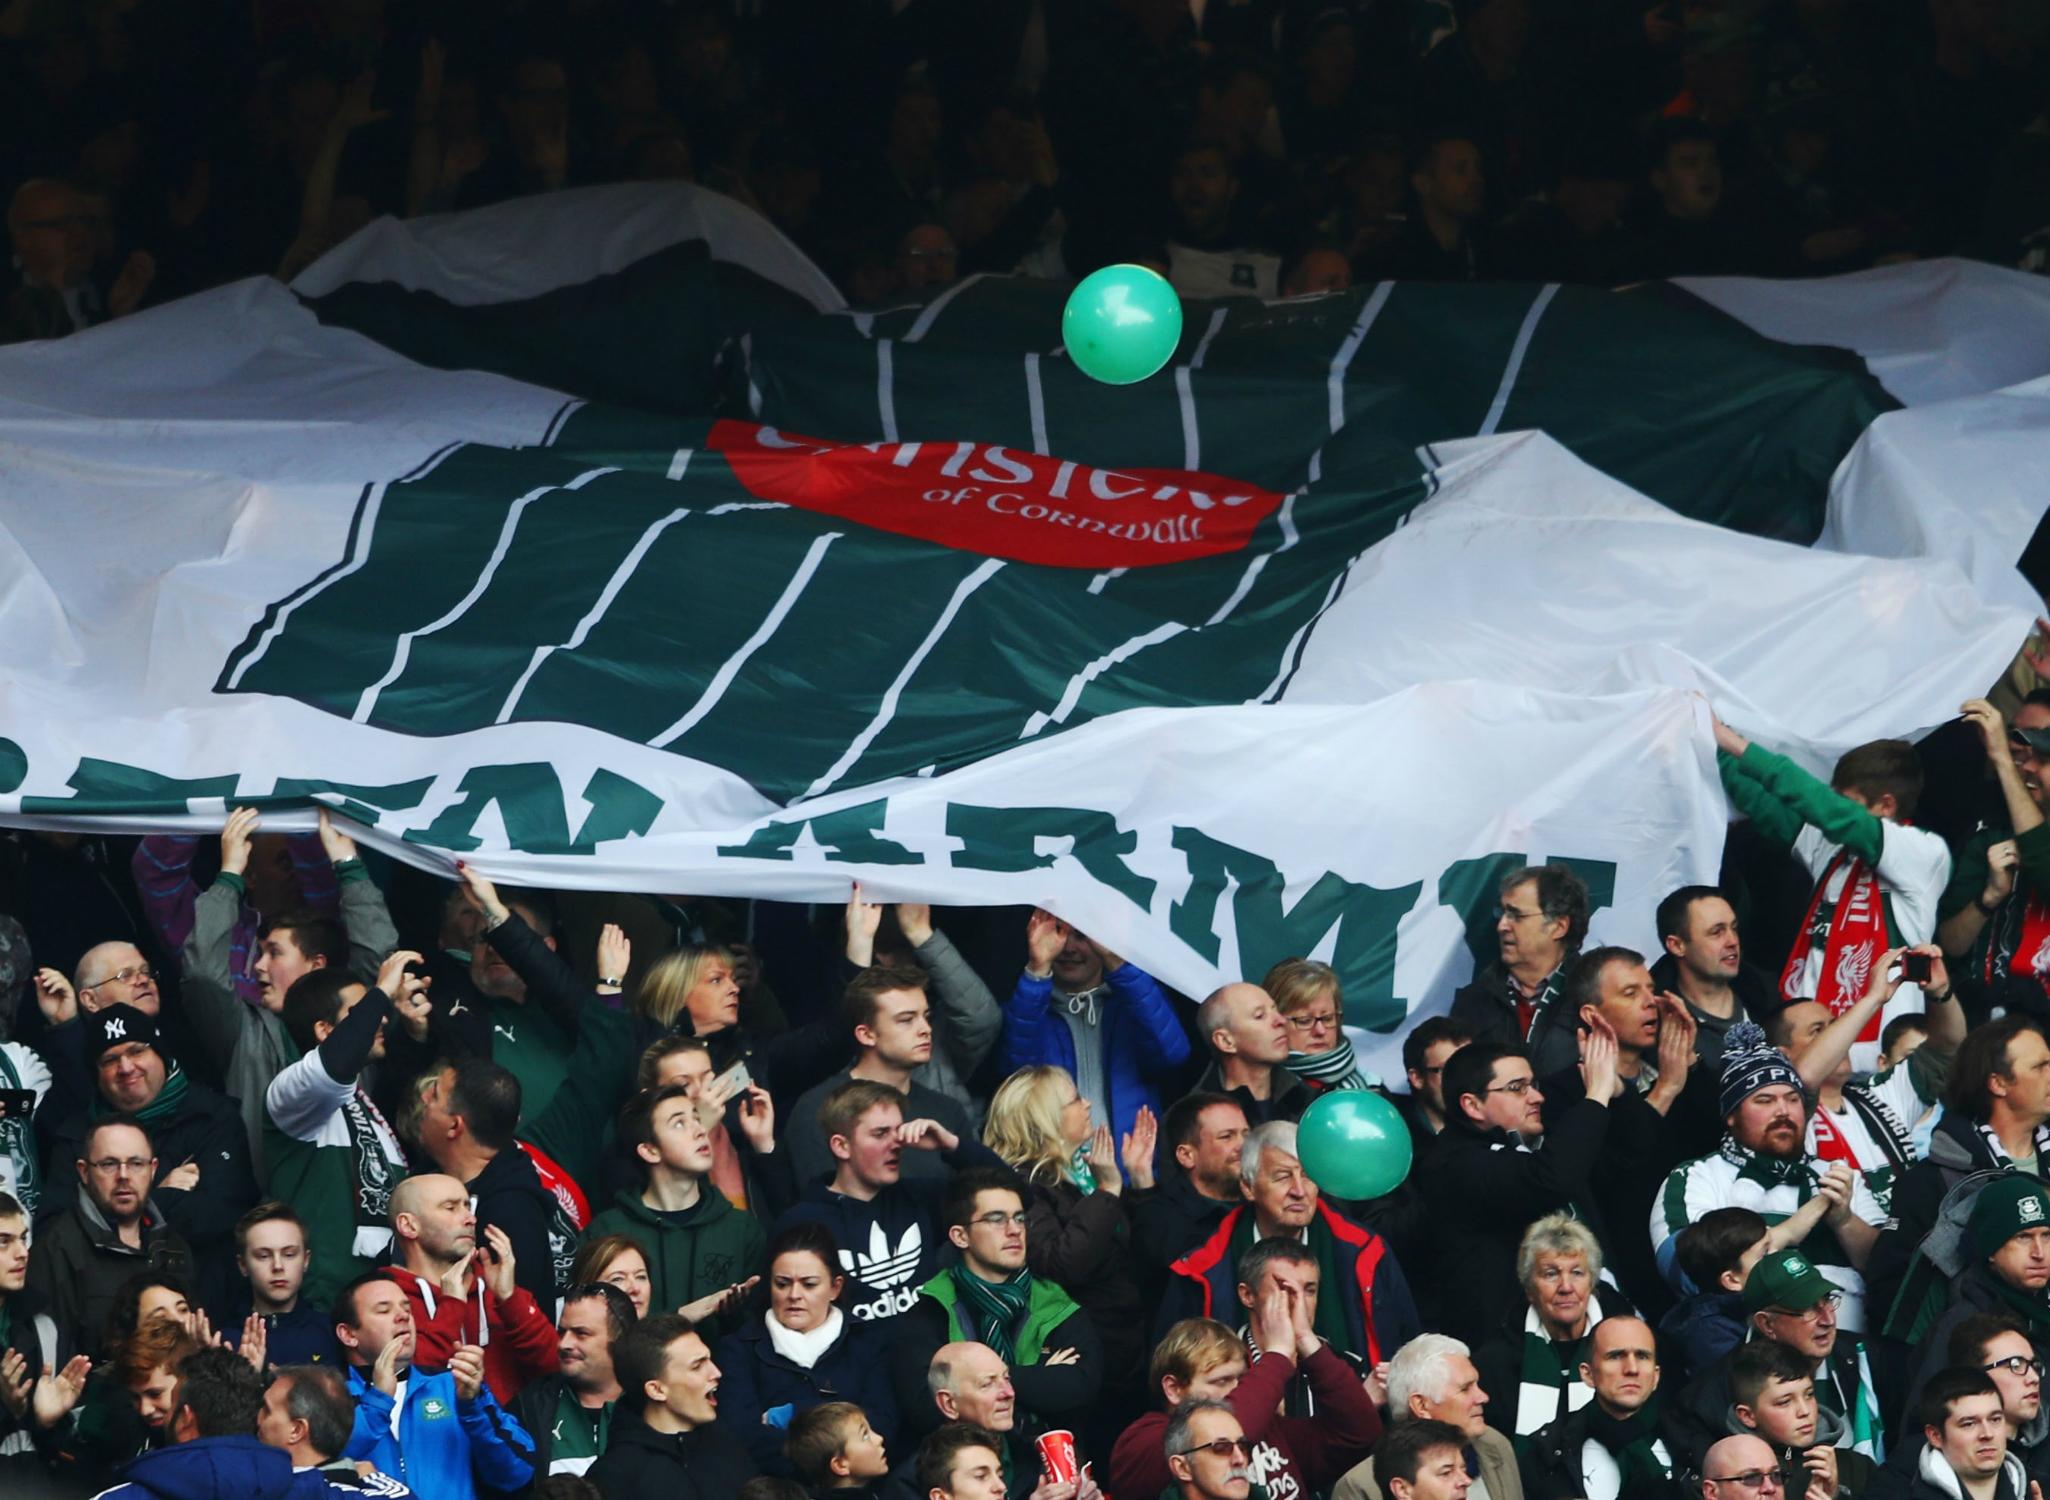 Plymouth Argyle fans will travel more than 1,000 miles over two games